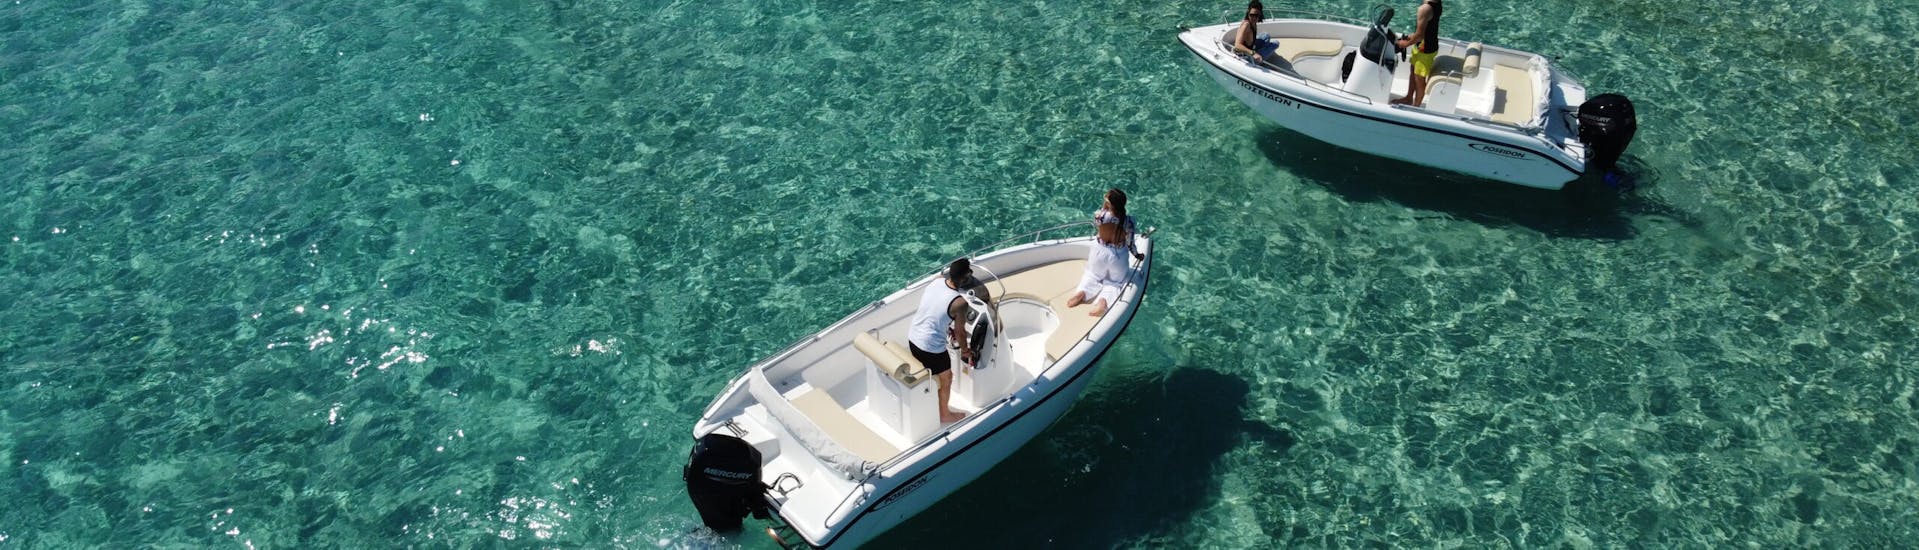 Rental boats in clear and blue waters during Boat Rental in Nea Fokea (up to 6 people) without License from Poseidon Rent a Boat Halkidiki.